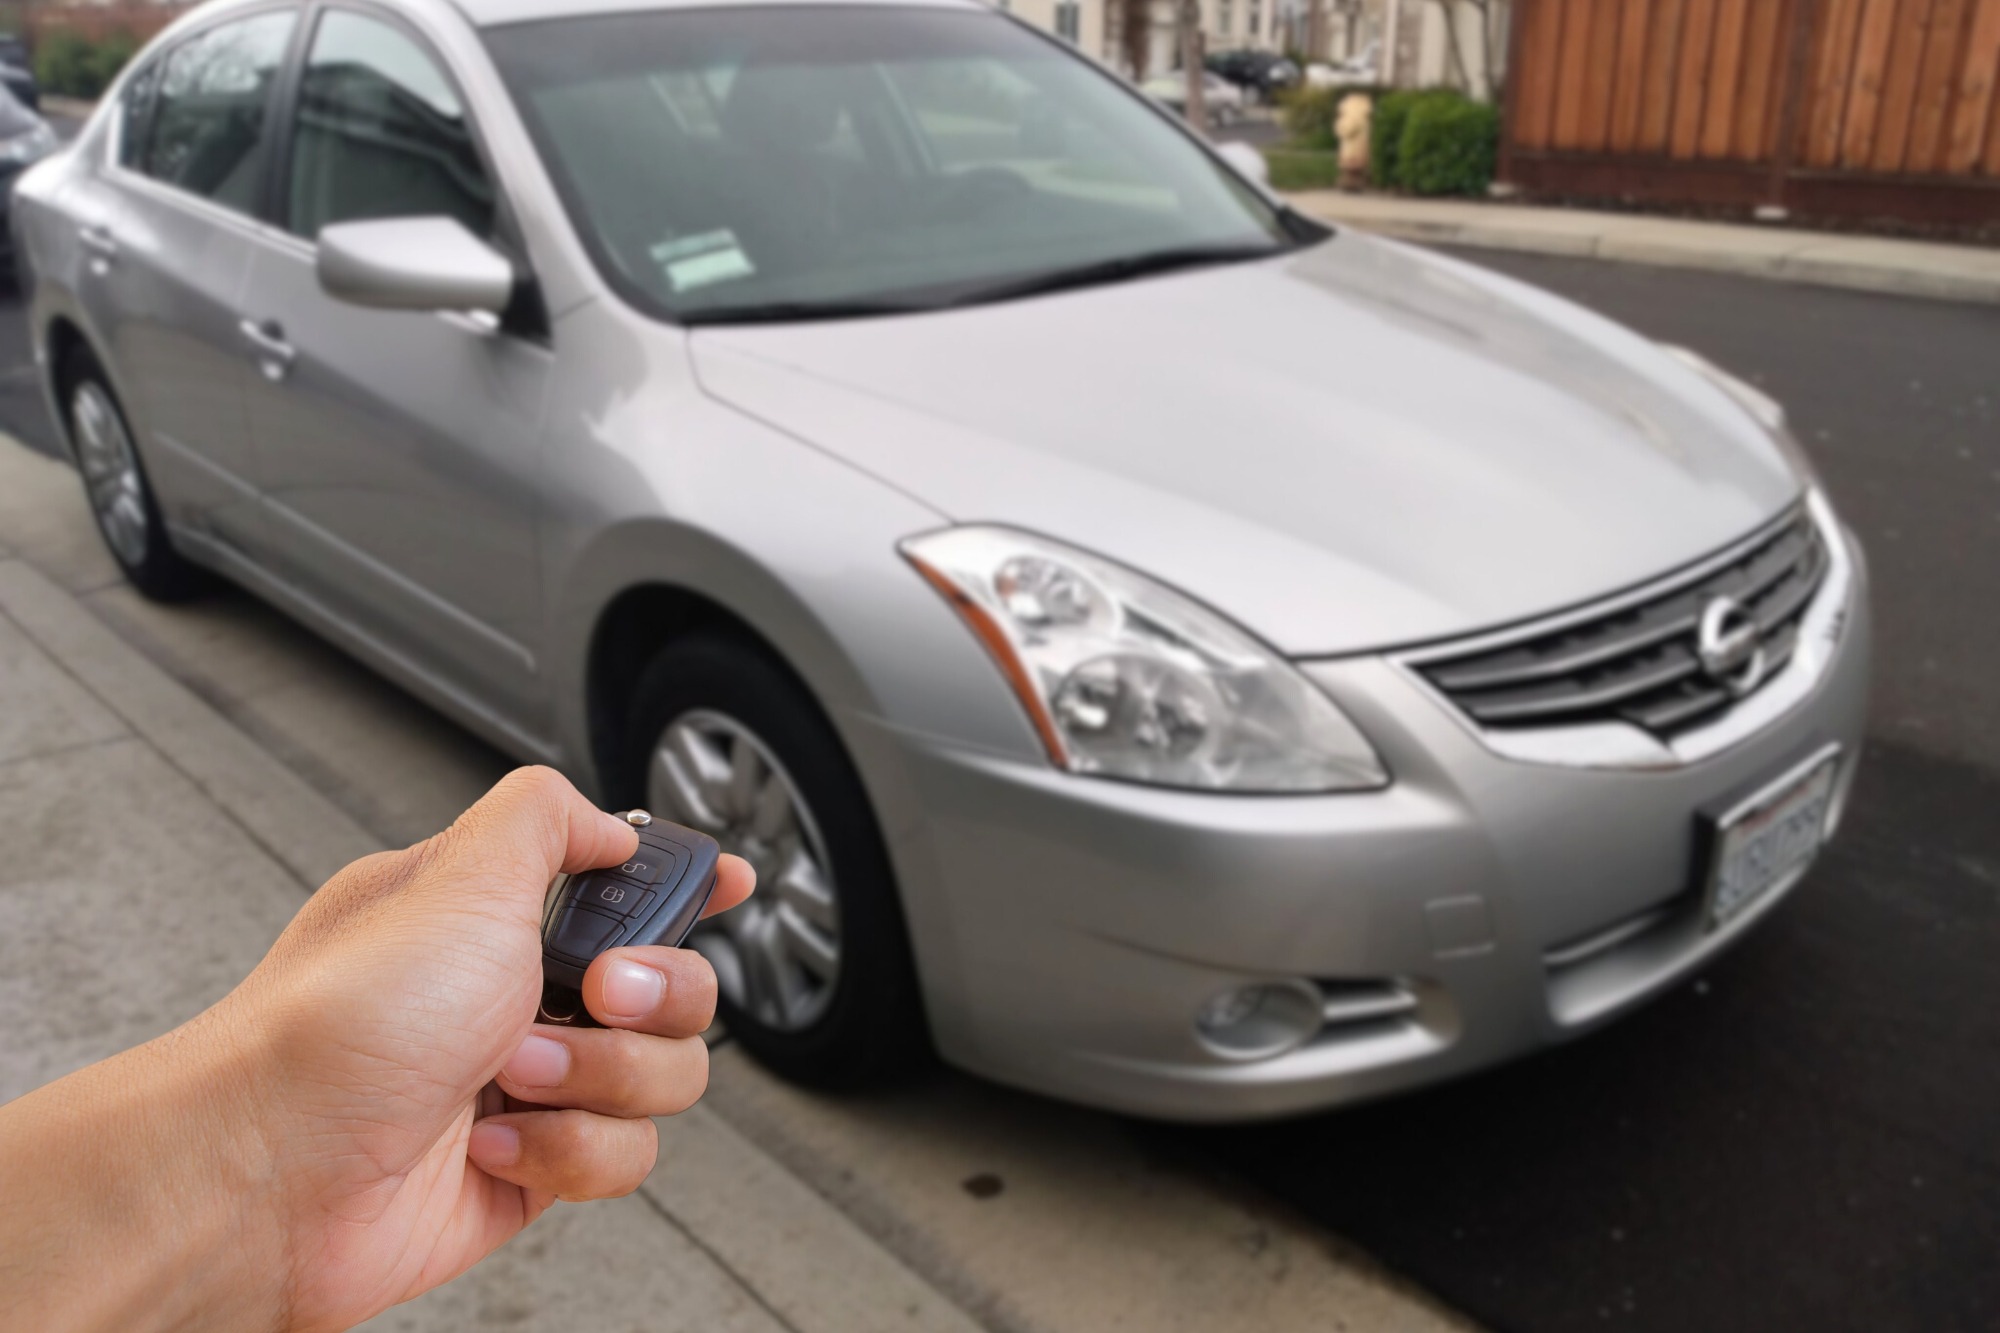 You are currently viewing No Key Detected On Nissan Altima: What You Need To Know